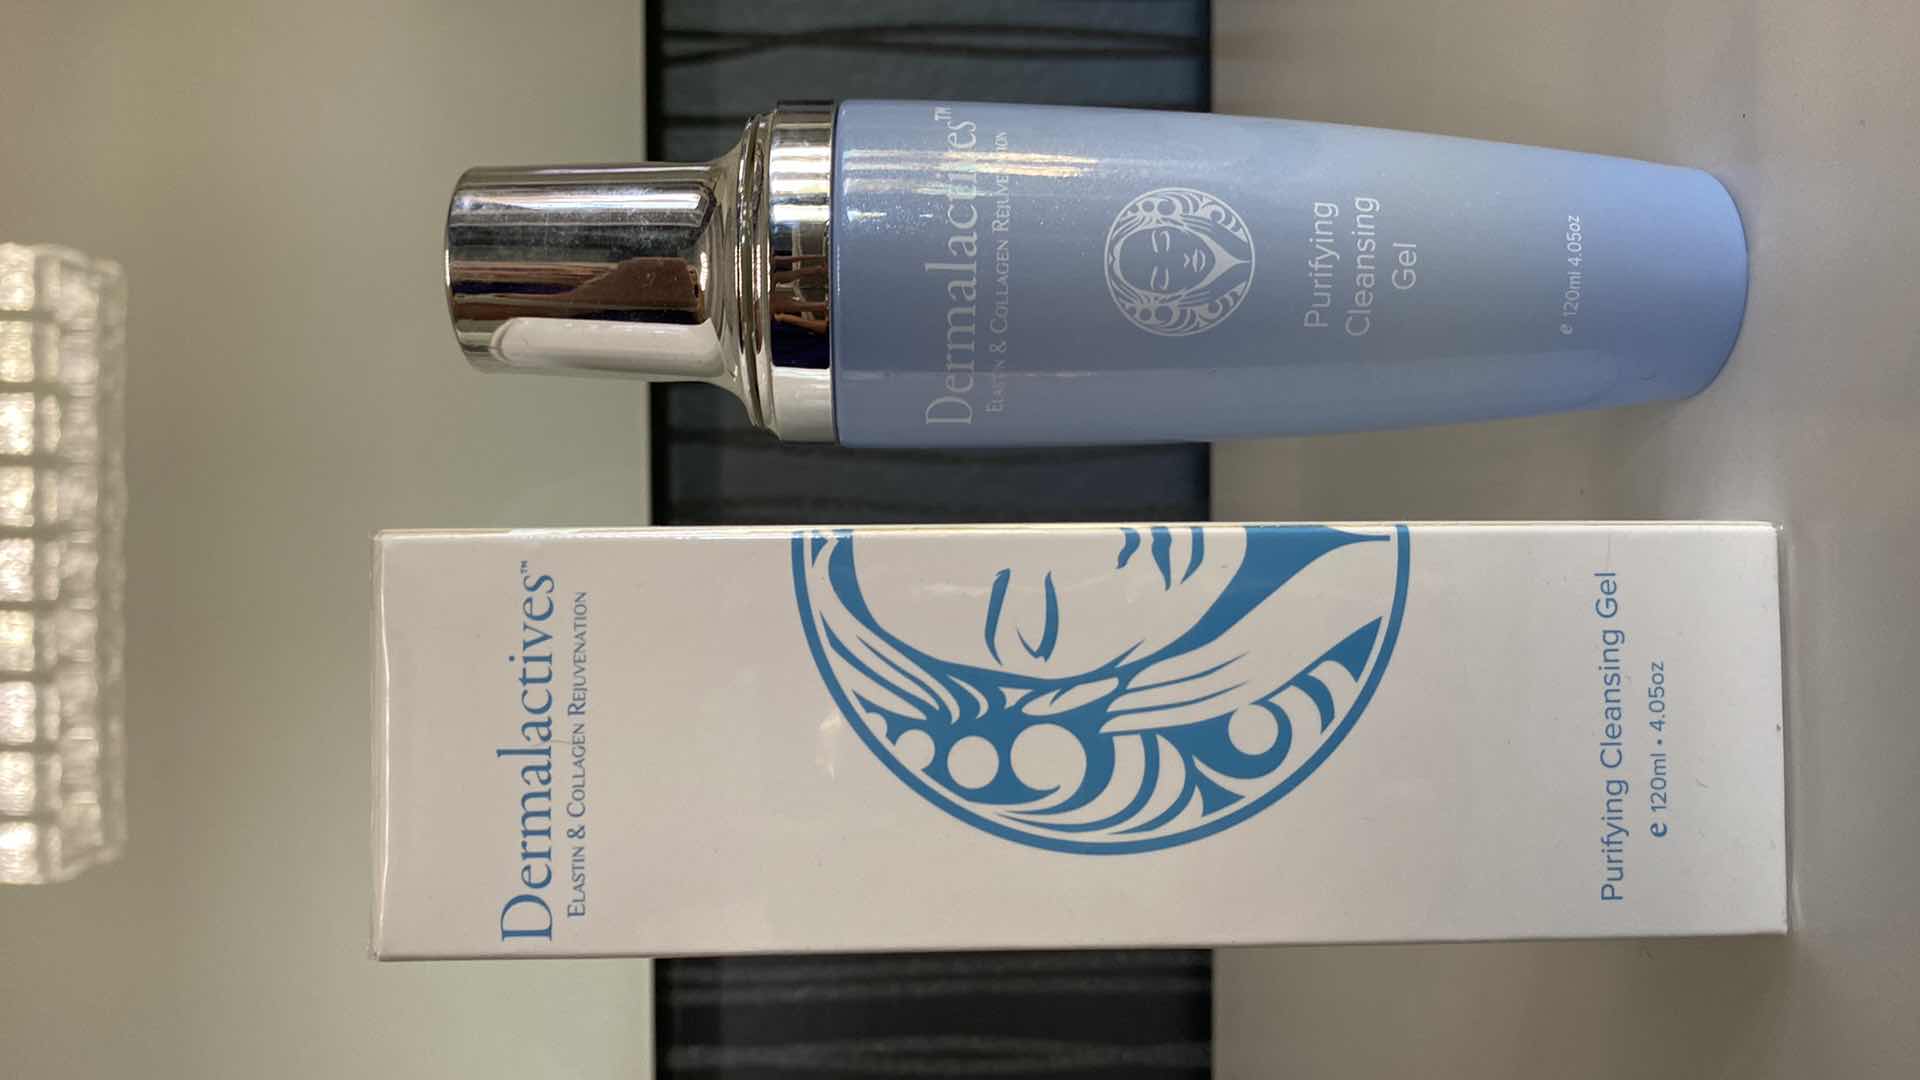 Photo 2 of NEW DERMALATIVES PURIFYING CLEANSING GEL -PURIFIES THE SKIN BY LIFTING AND REMOVING MAKE-UP, OIL BASED DEBRIS AND IMPURITIES